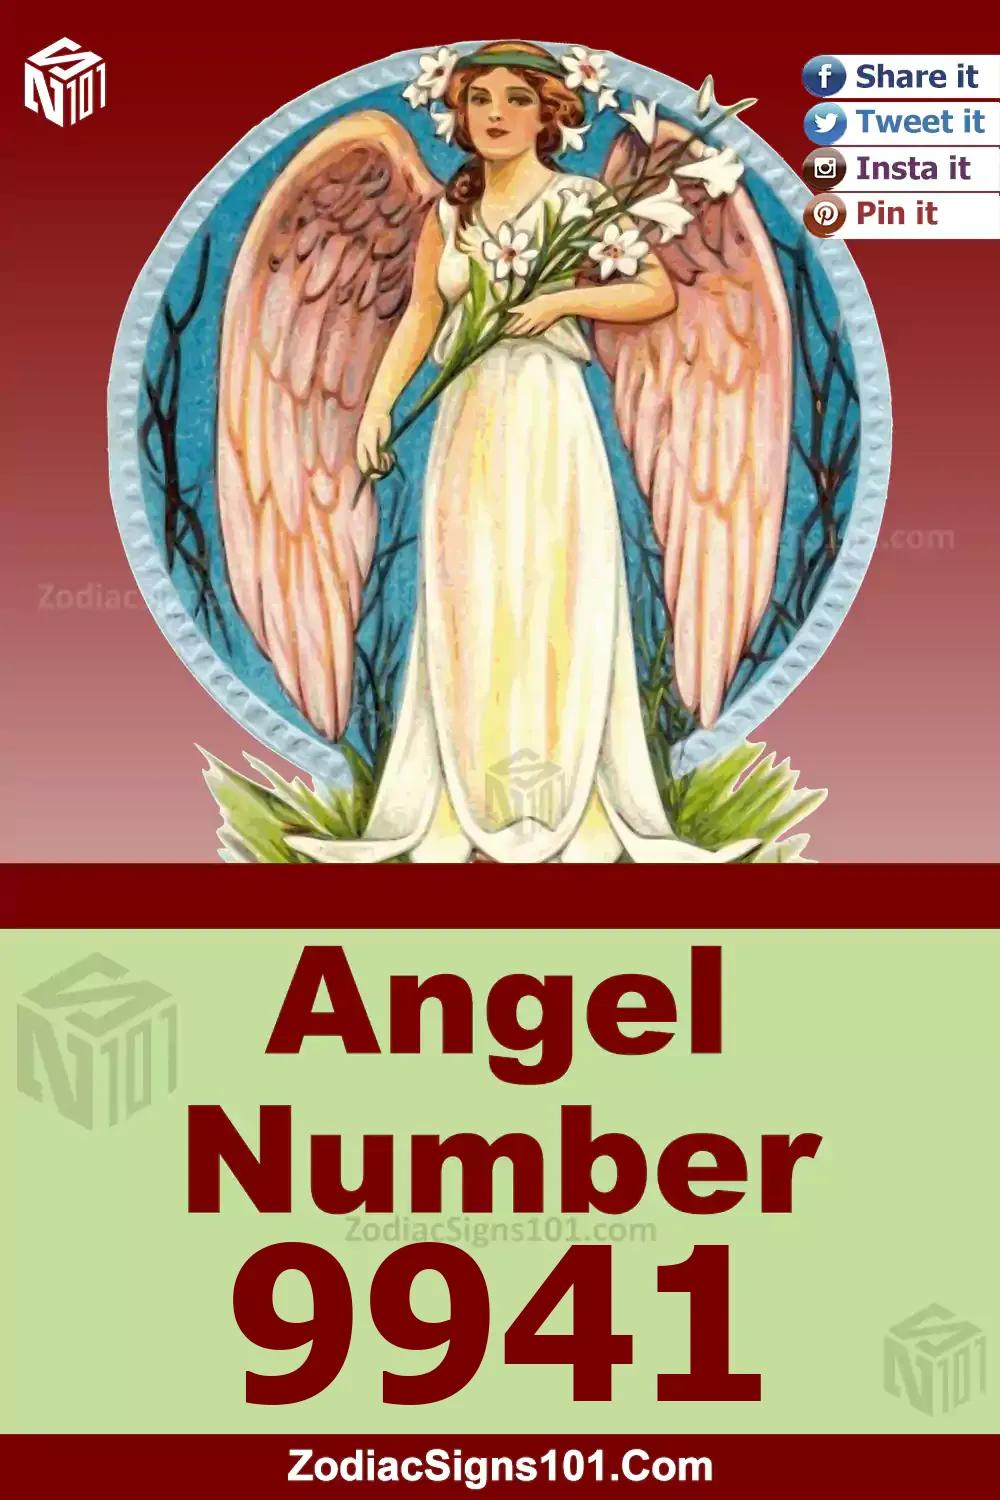 9941 Angel Number Meaning